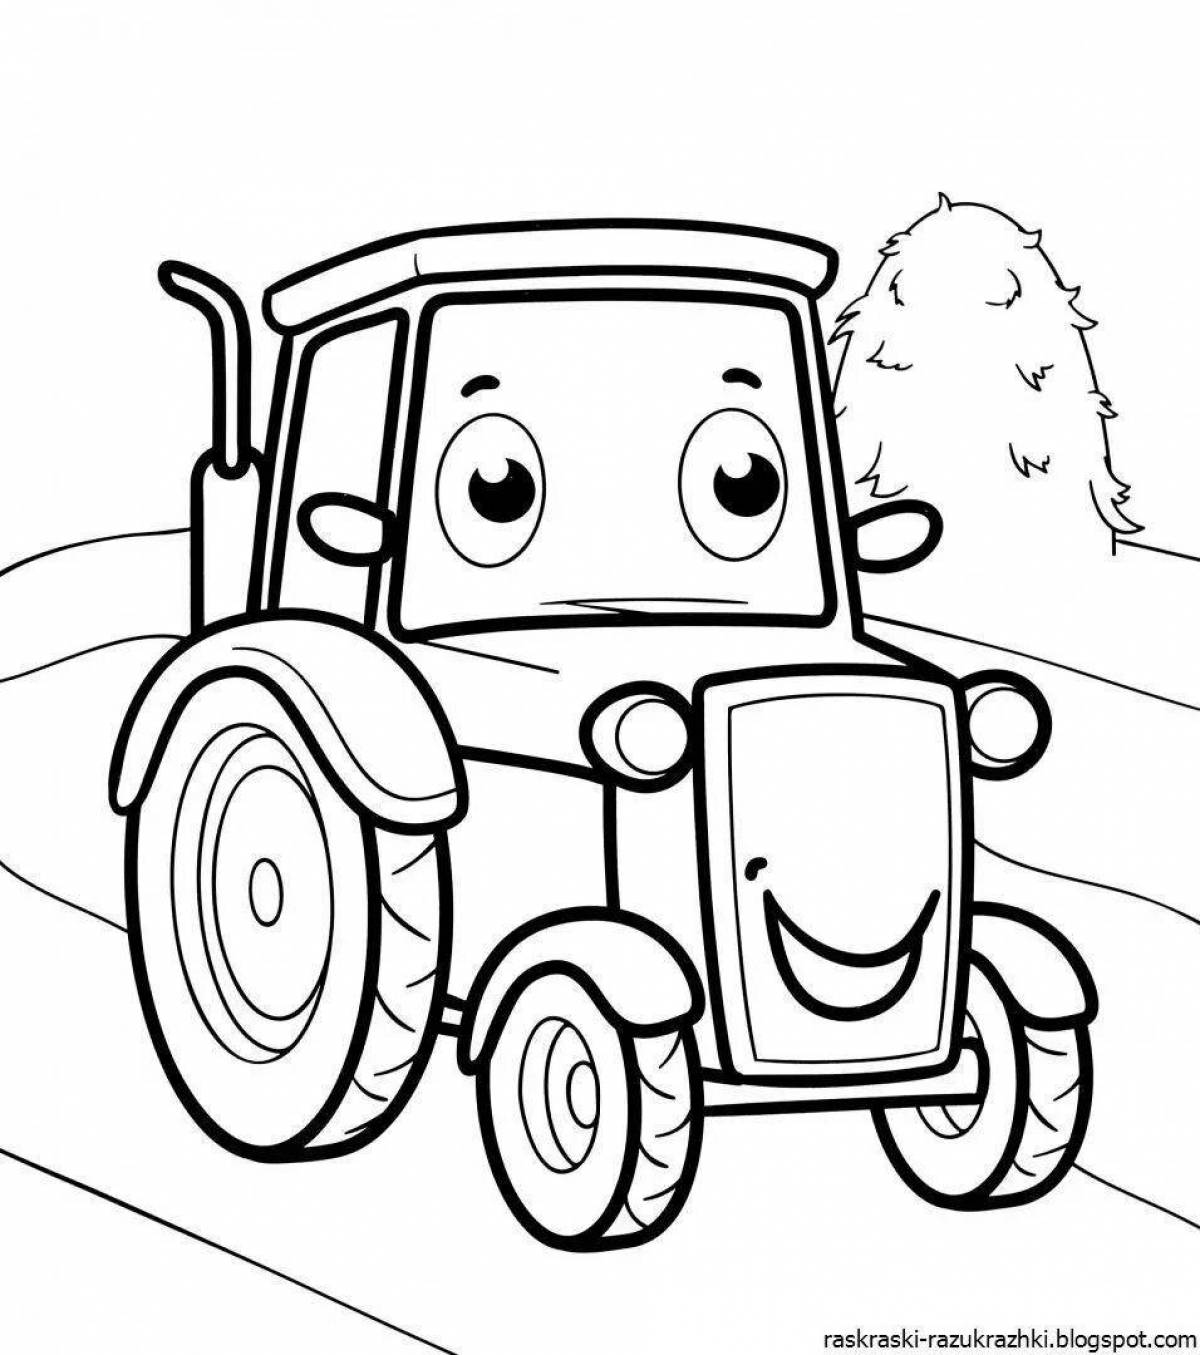 Amazing coloring pages for boys 4